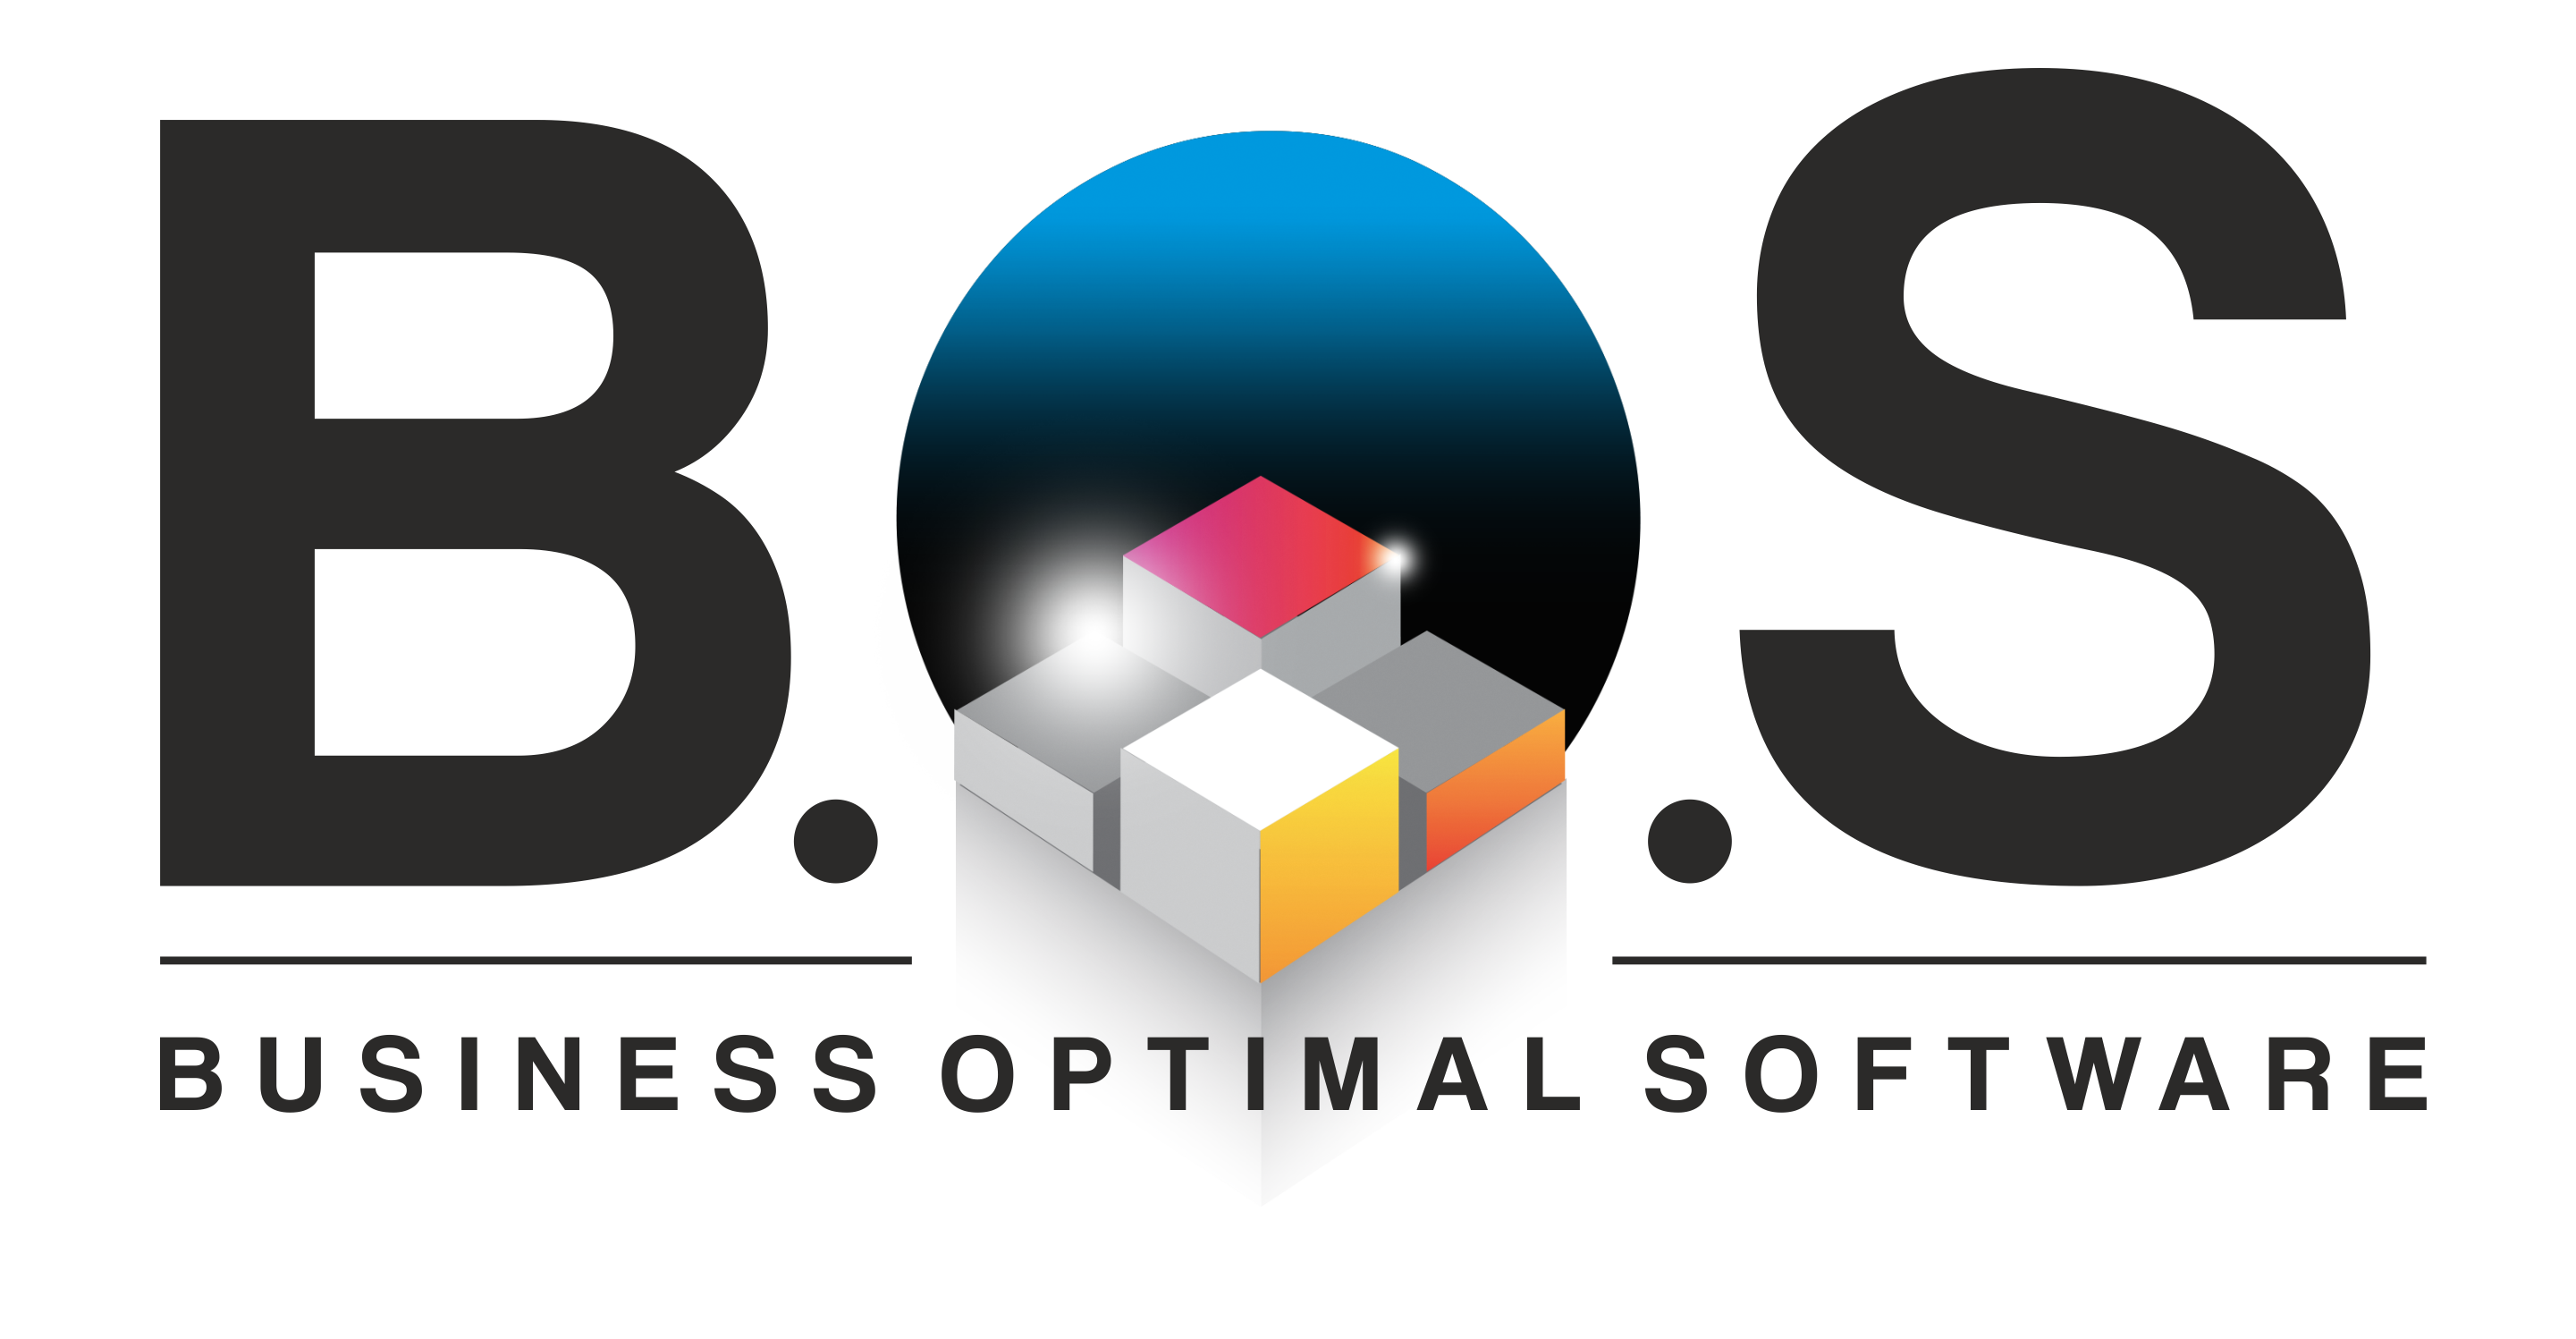 Business Optimal Software